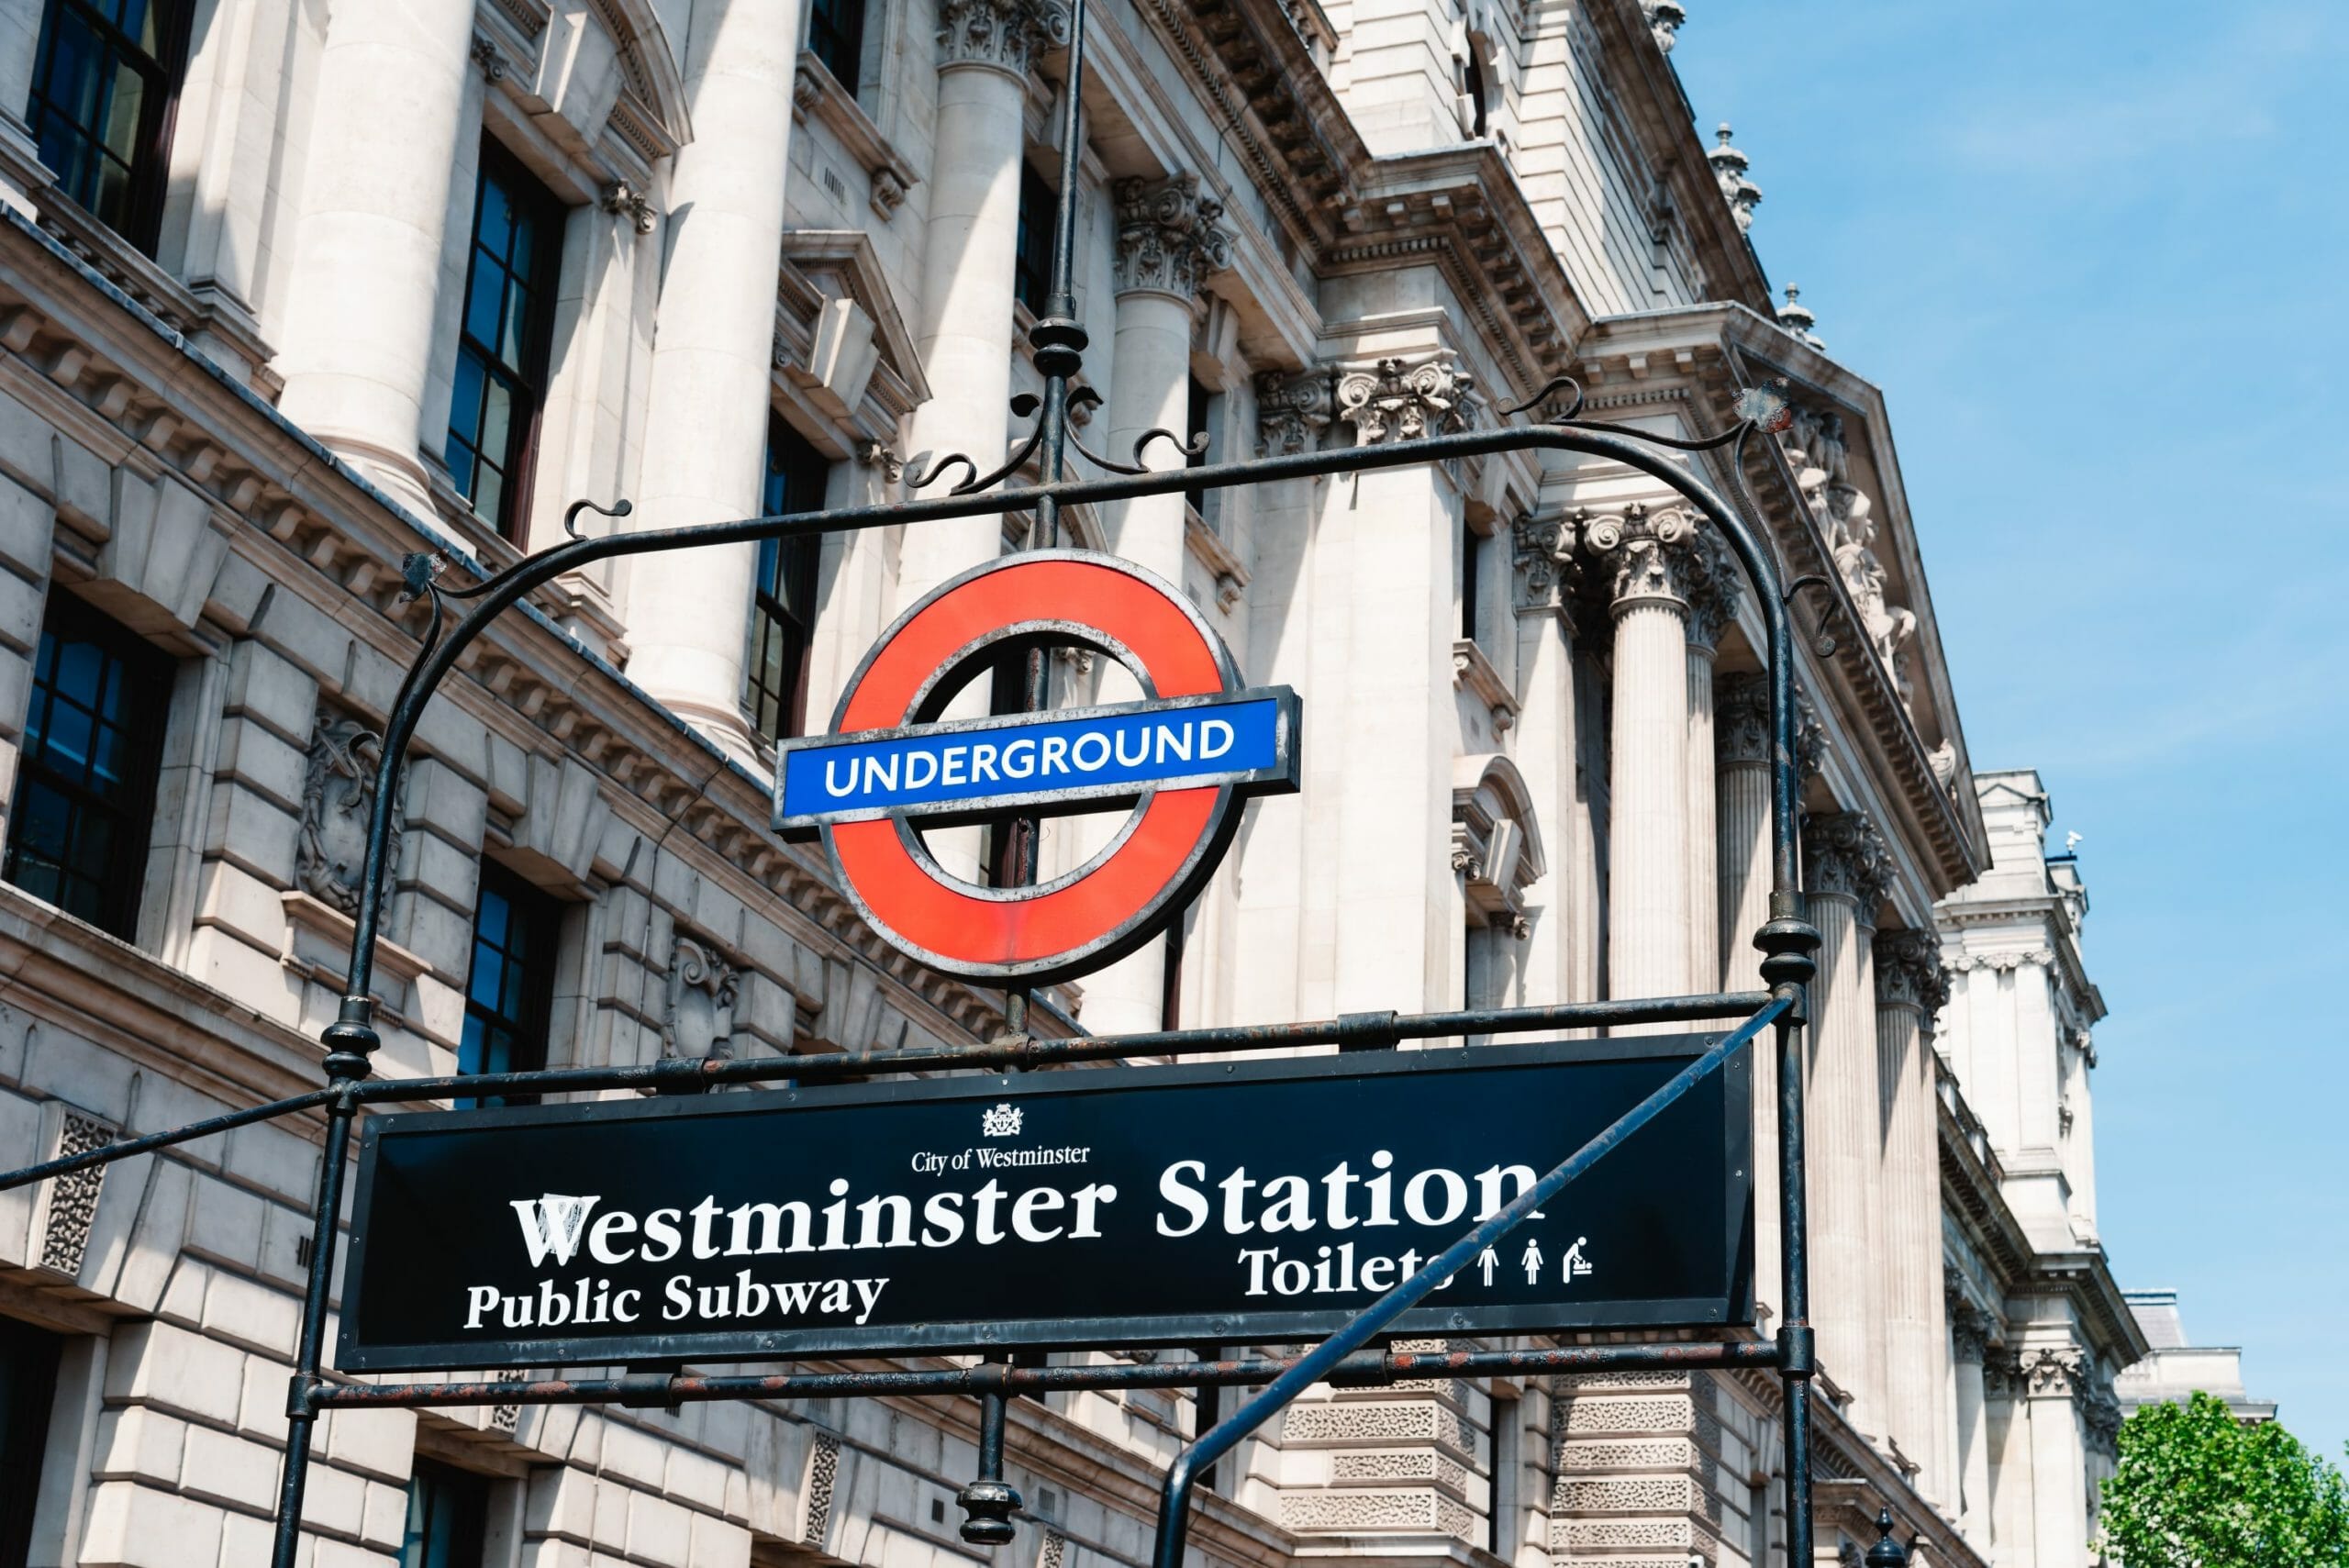 low-angle-view-of-underground-sign-in-london-brit-